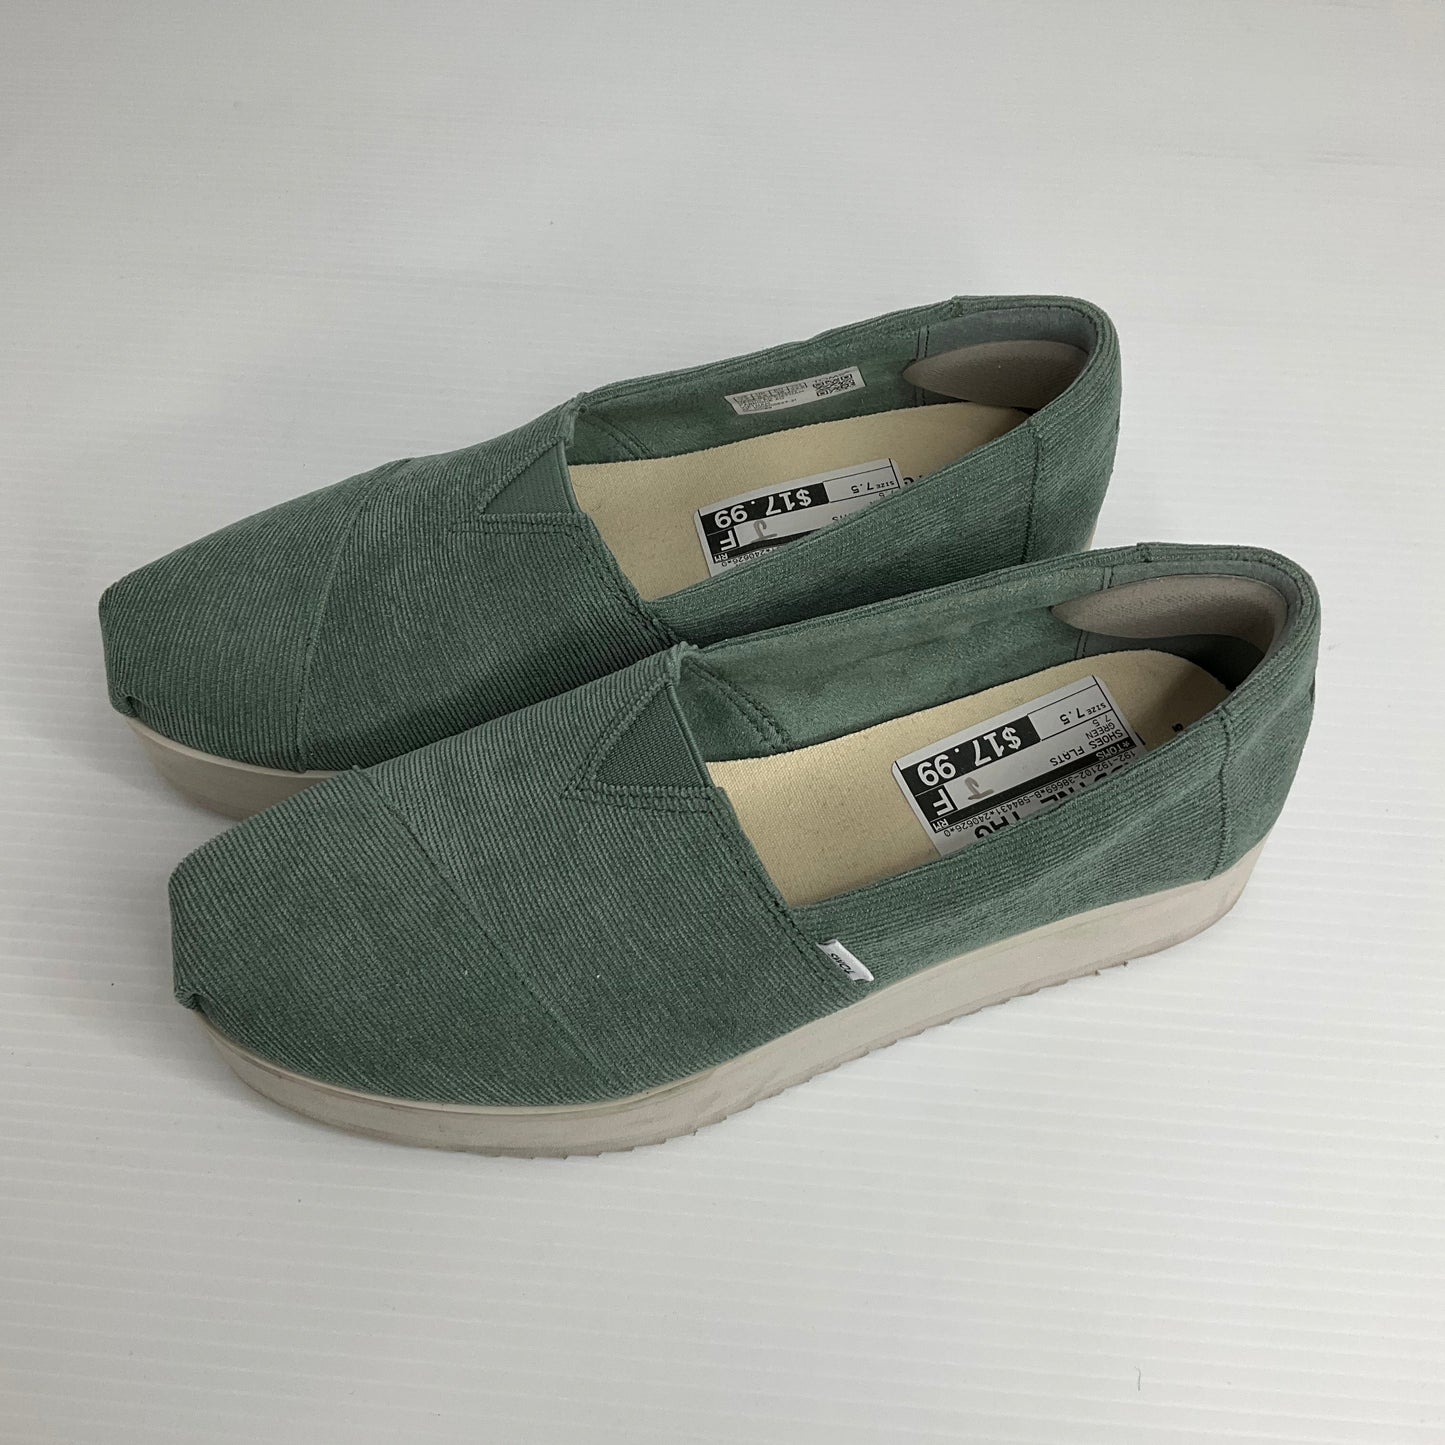 Green Shoes Flats Toms, Size 7.5